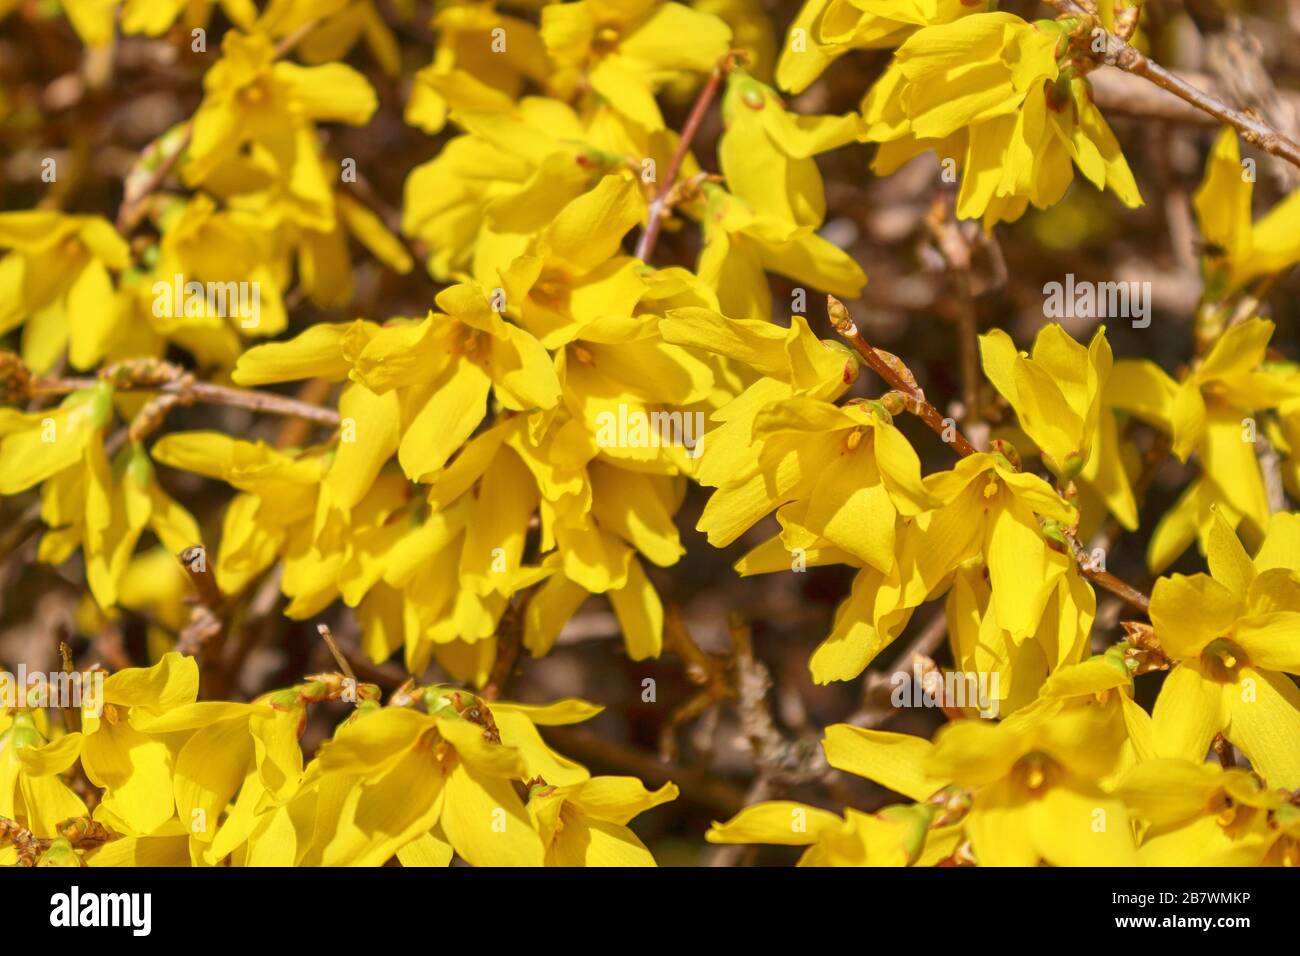 Forsythia flowers. Forsythia are deciduous shrubs and produce flowers in the early spring before the leaves. Stock Photo